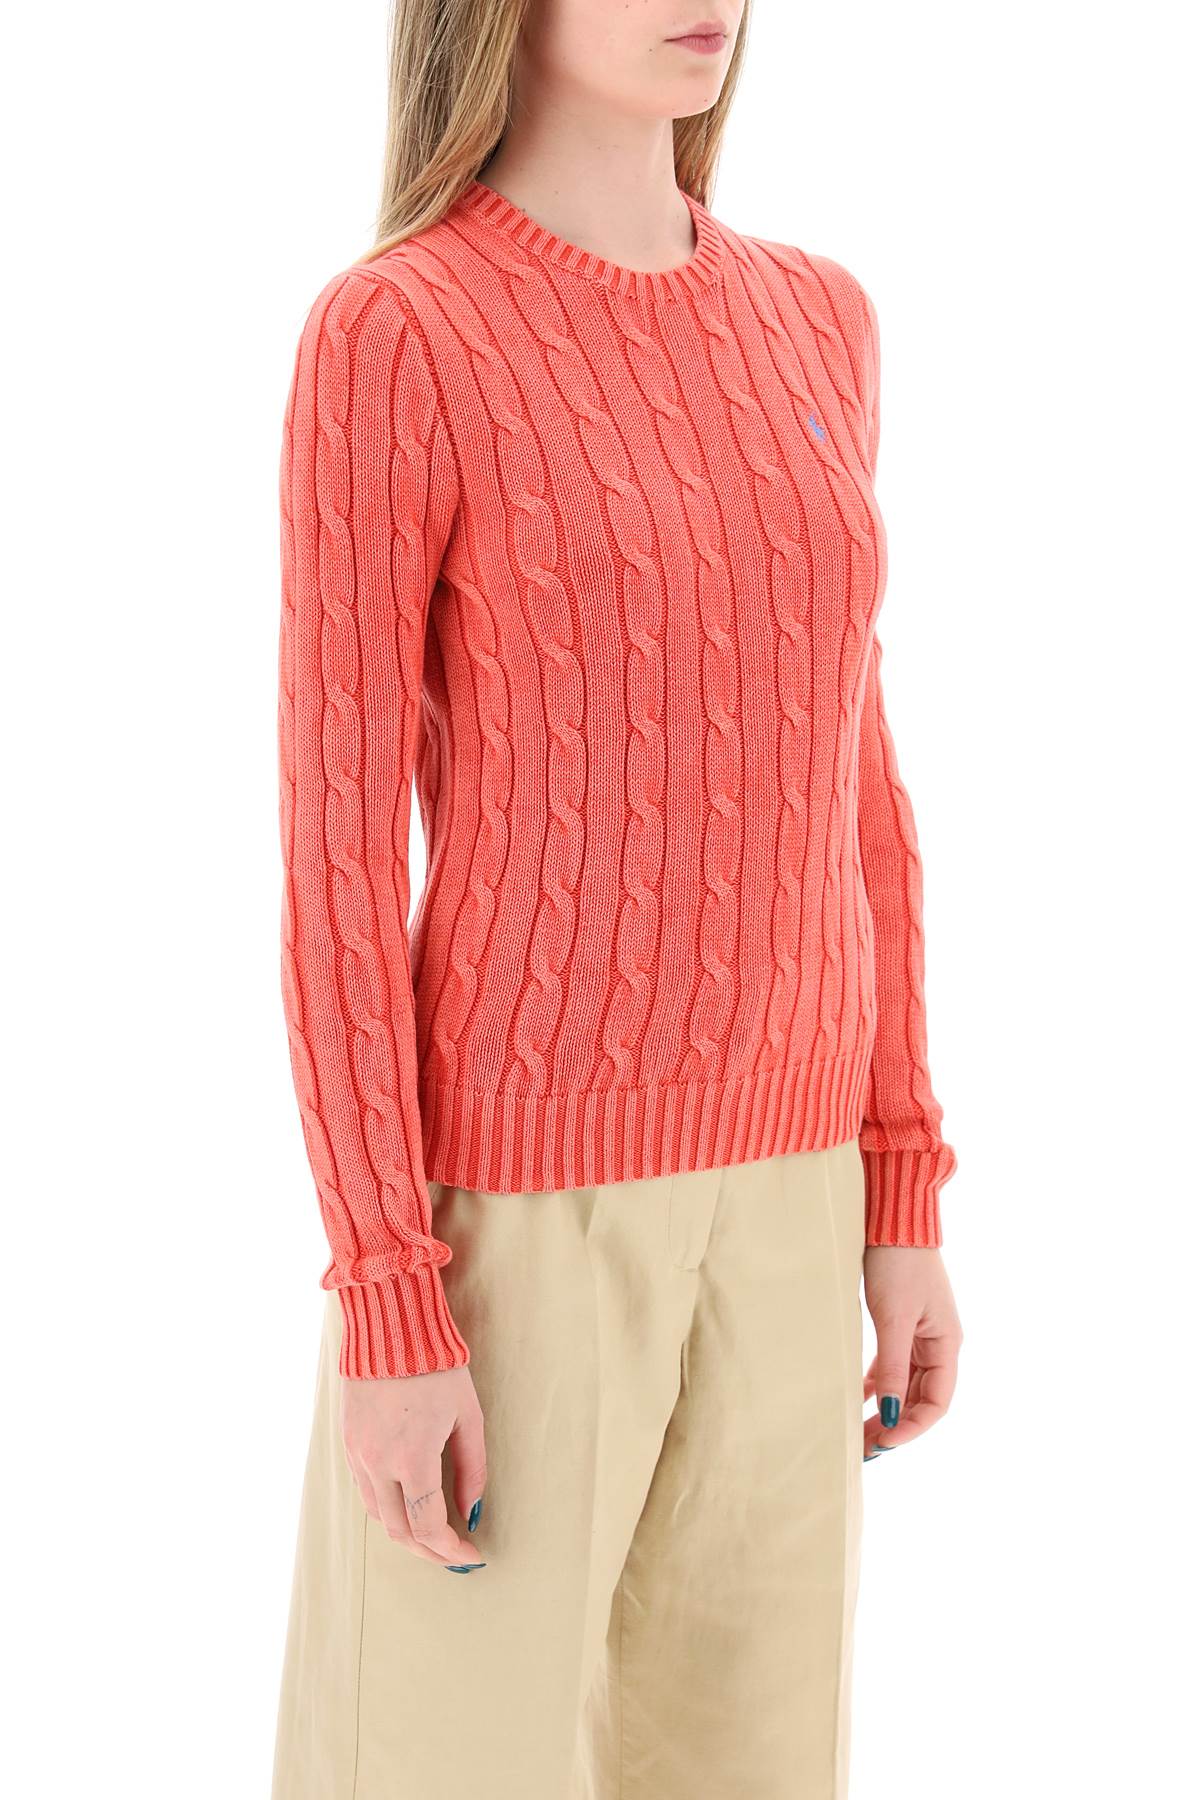 cotton cable knit pullover sweater-1